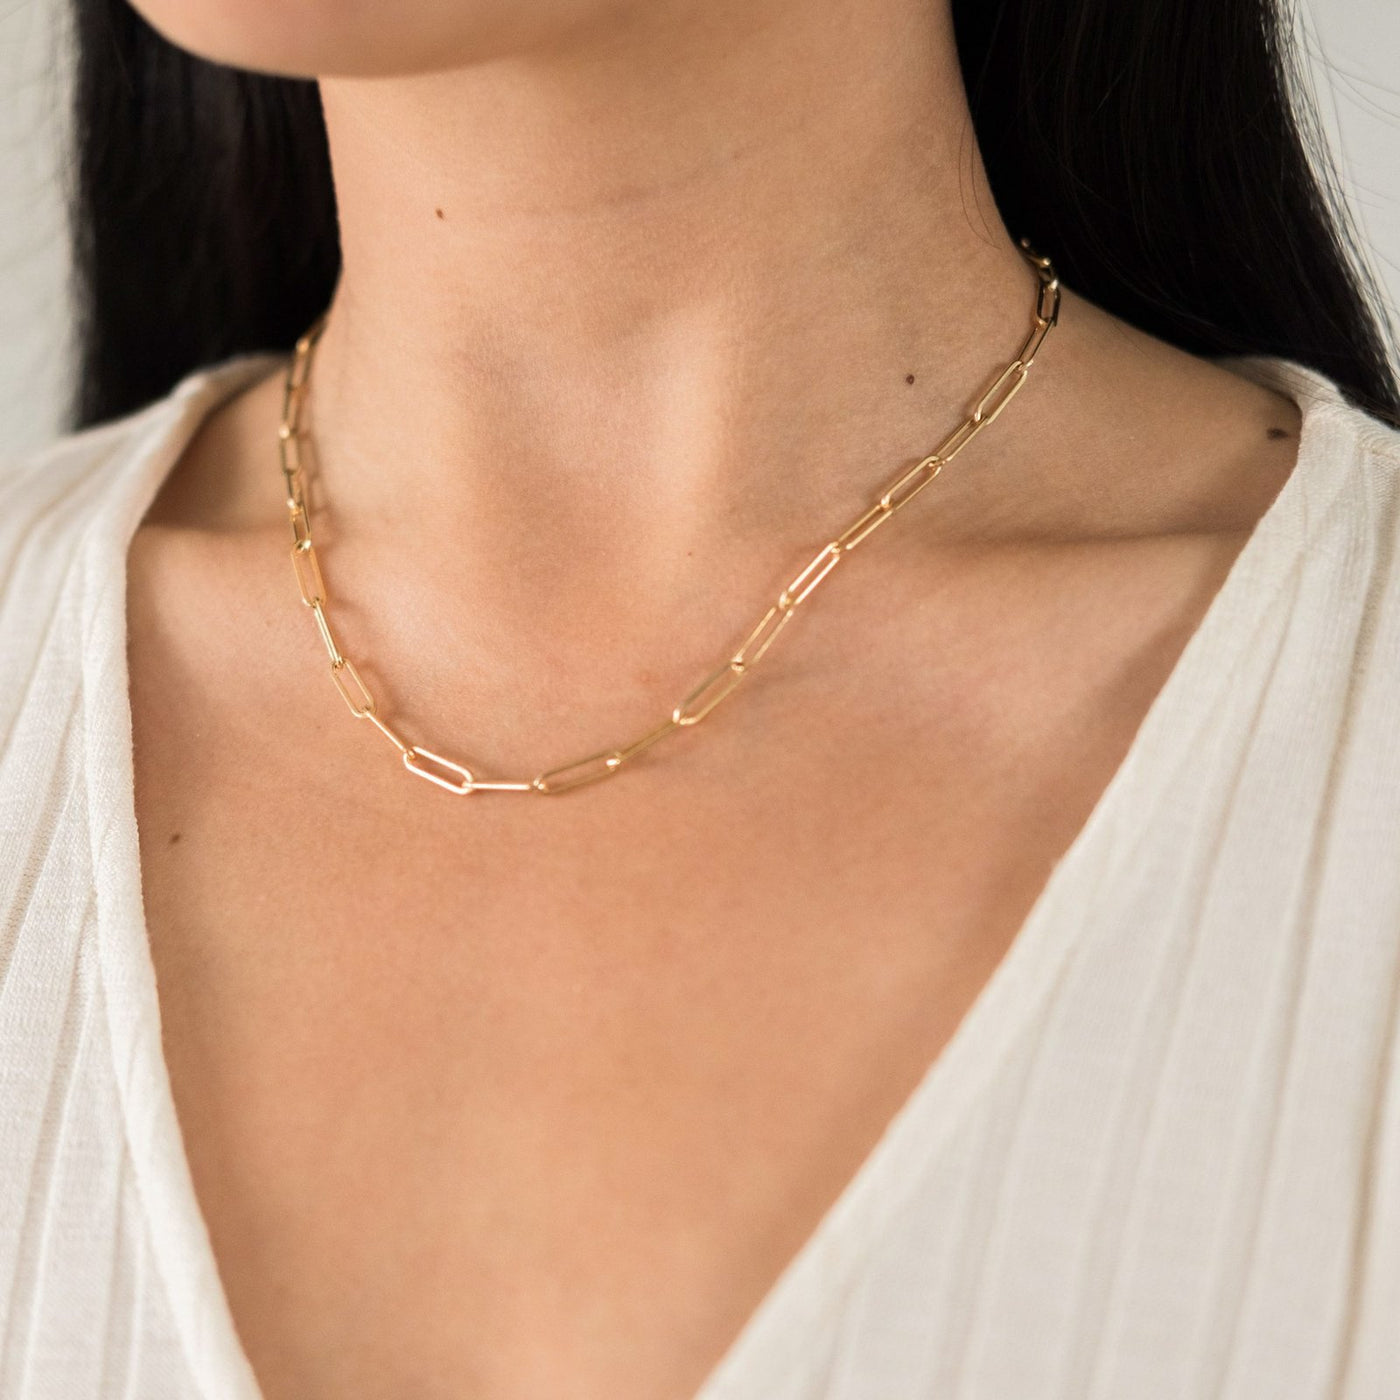 Chunky Paperclip Necklace by Simple & Dainty Jewelry